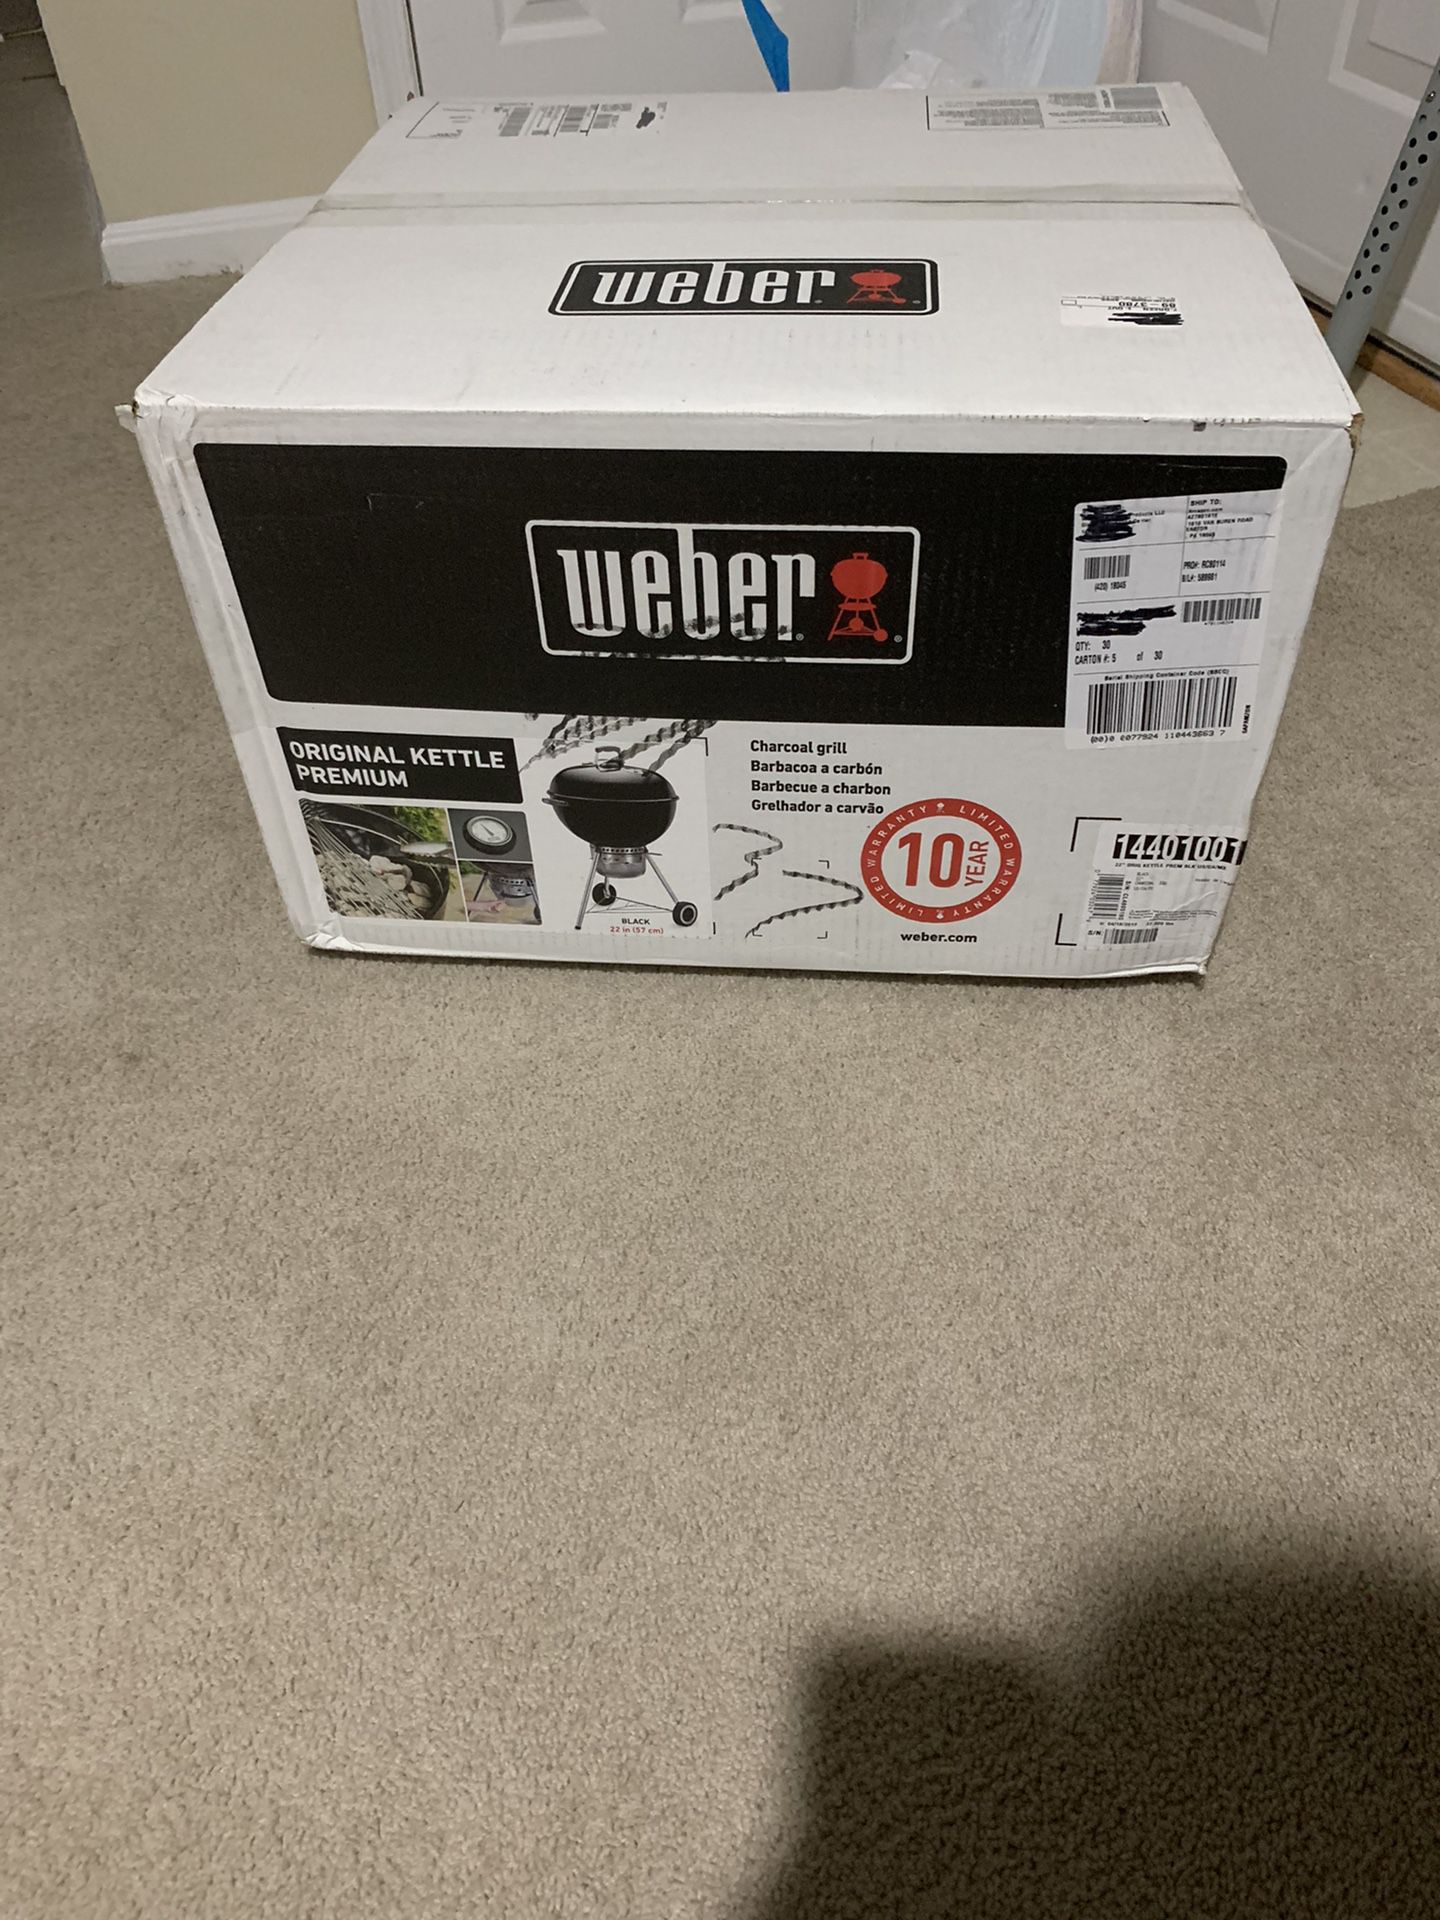 Brand new 22 inch Weber charcoal grill